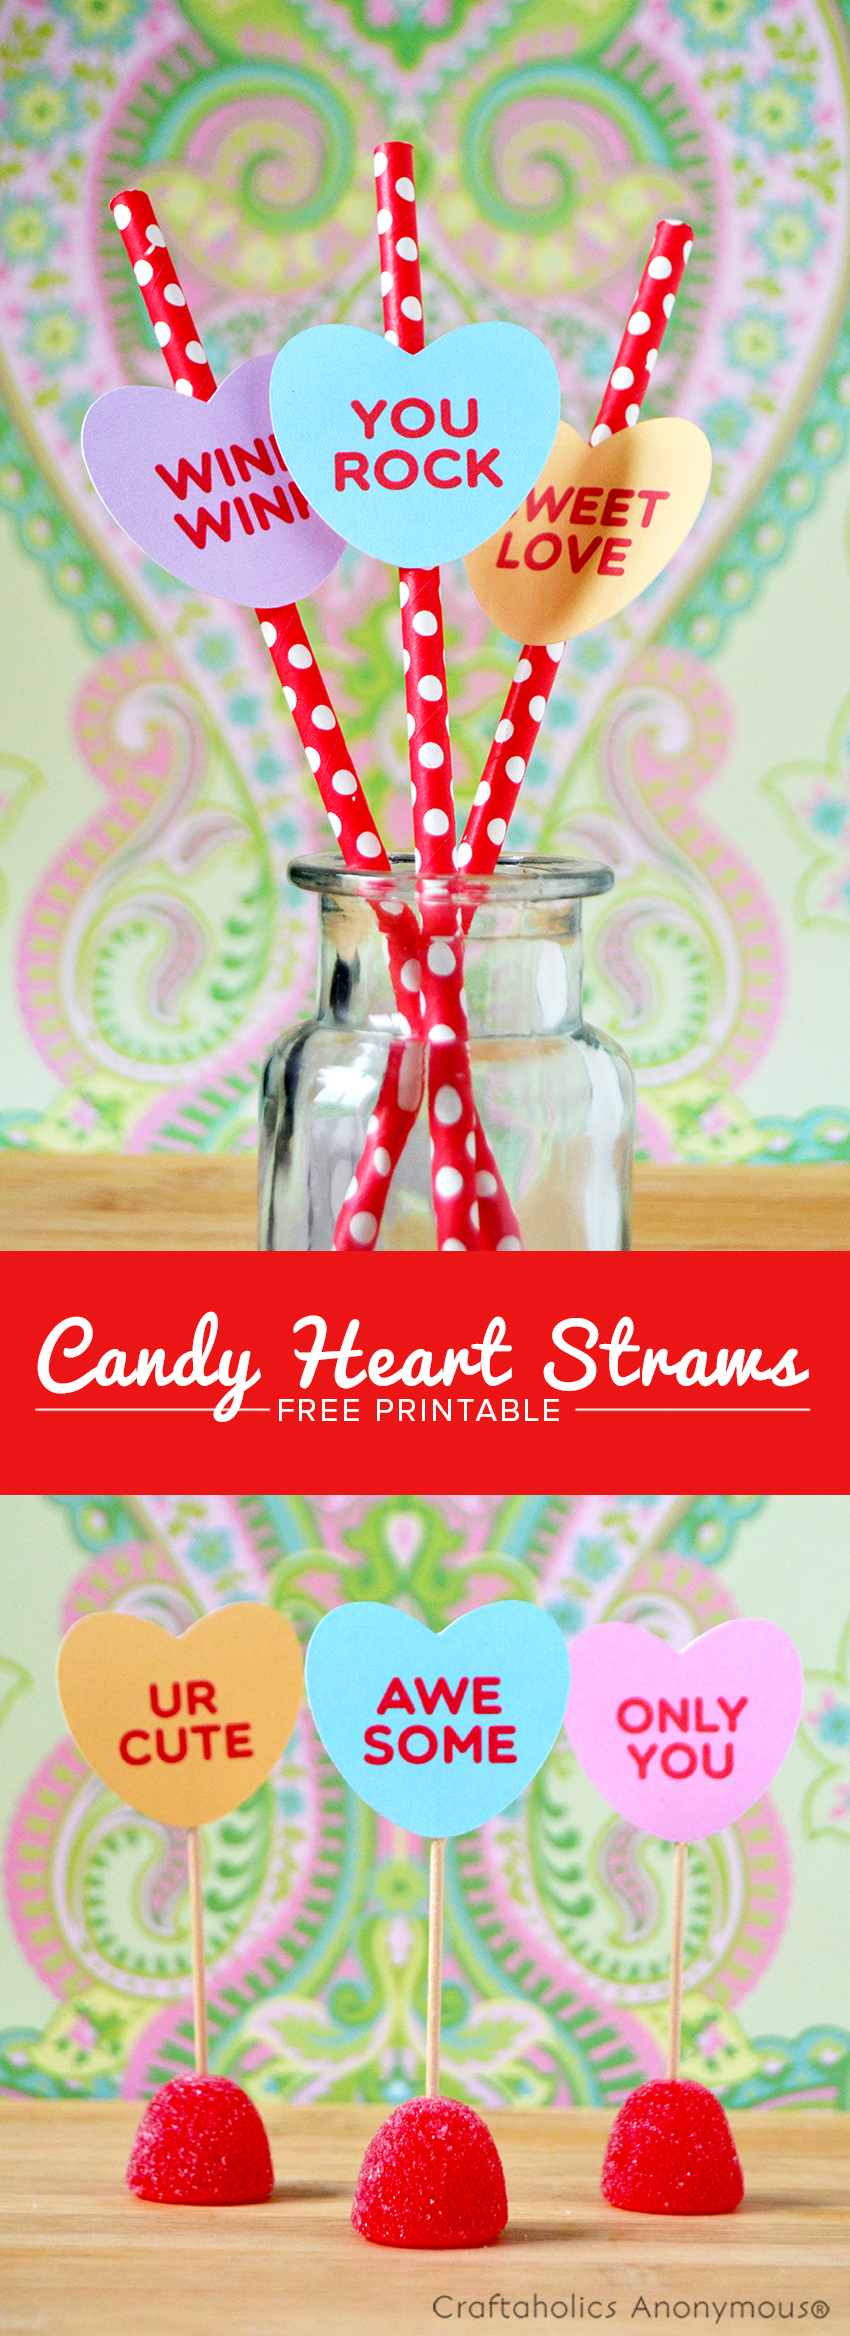 candy-heart-straw-printable-5